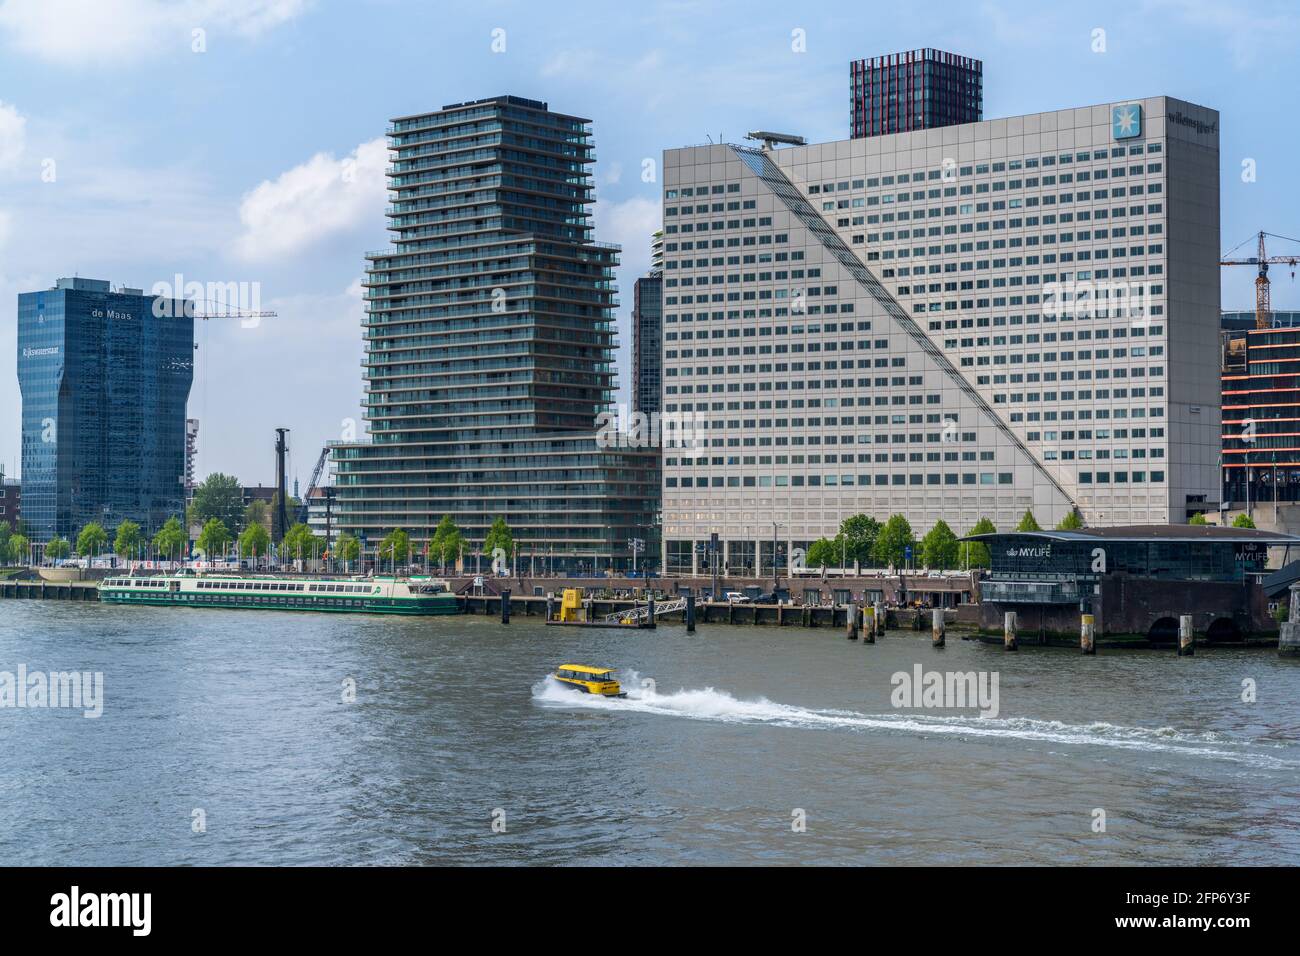 Rotterdam, Netherlands - 14 May, 2021: yellow water taxi on the Nieuwe Maas River with downtown Rotterdam skyscrapers behind Stock Photo